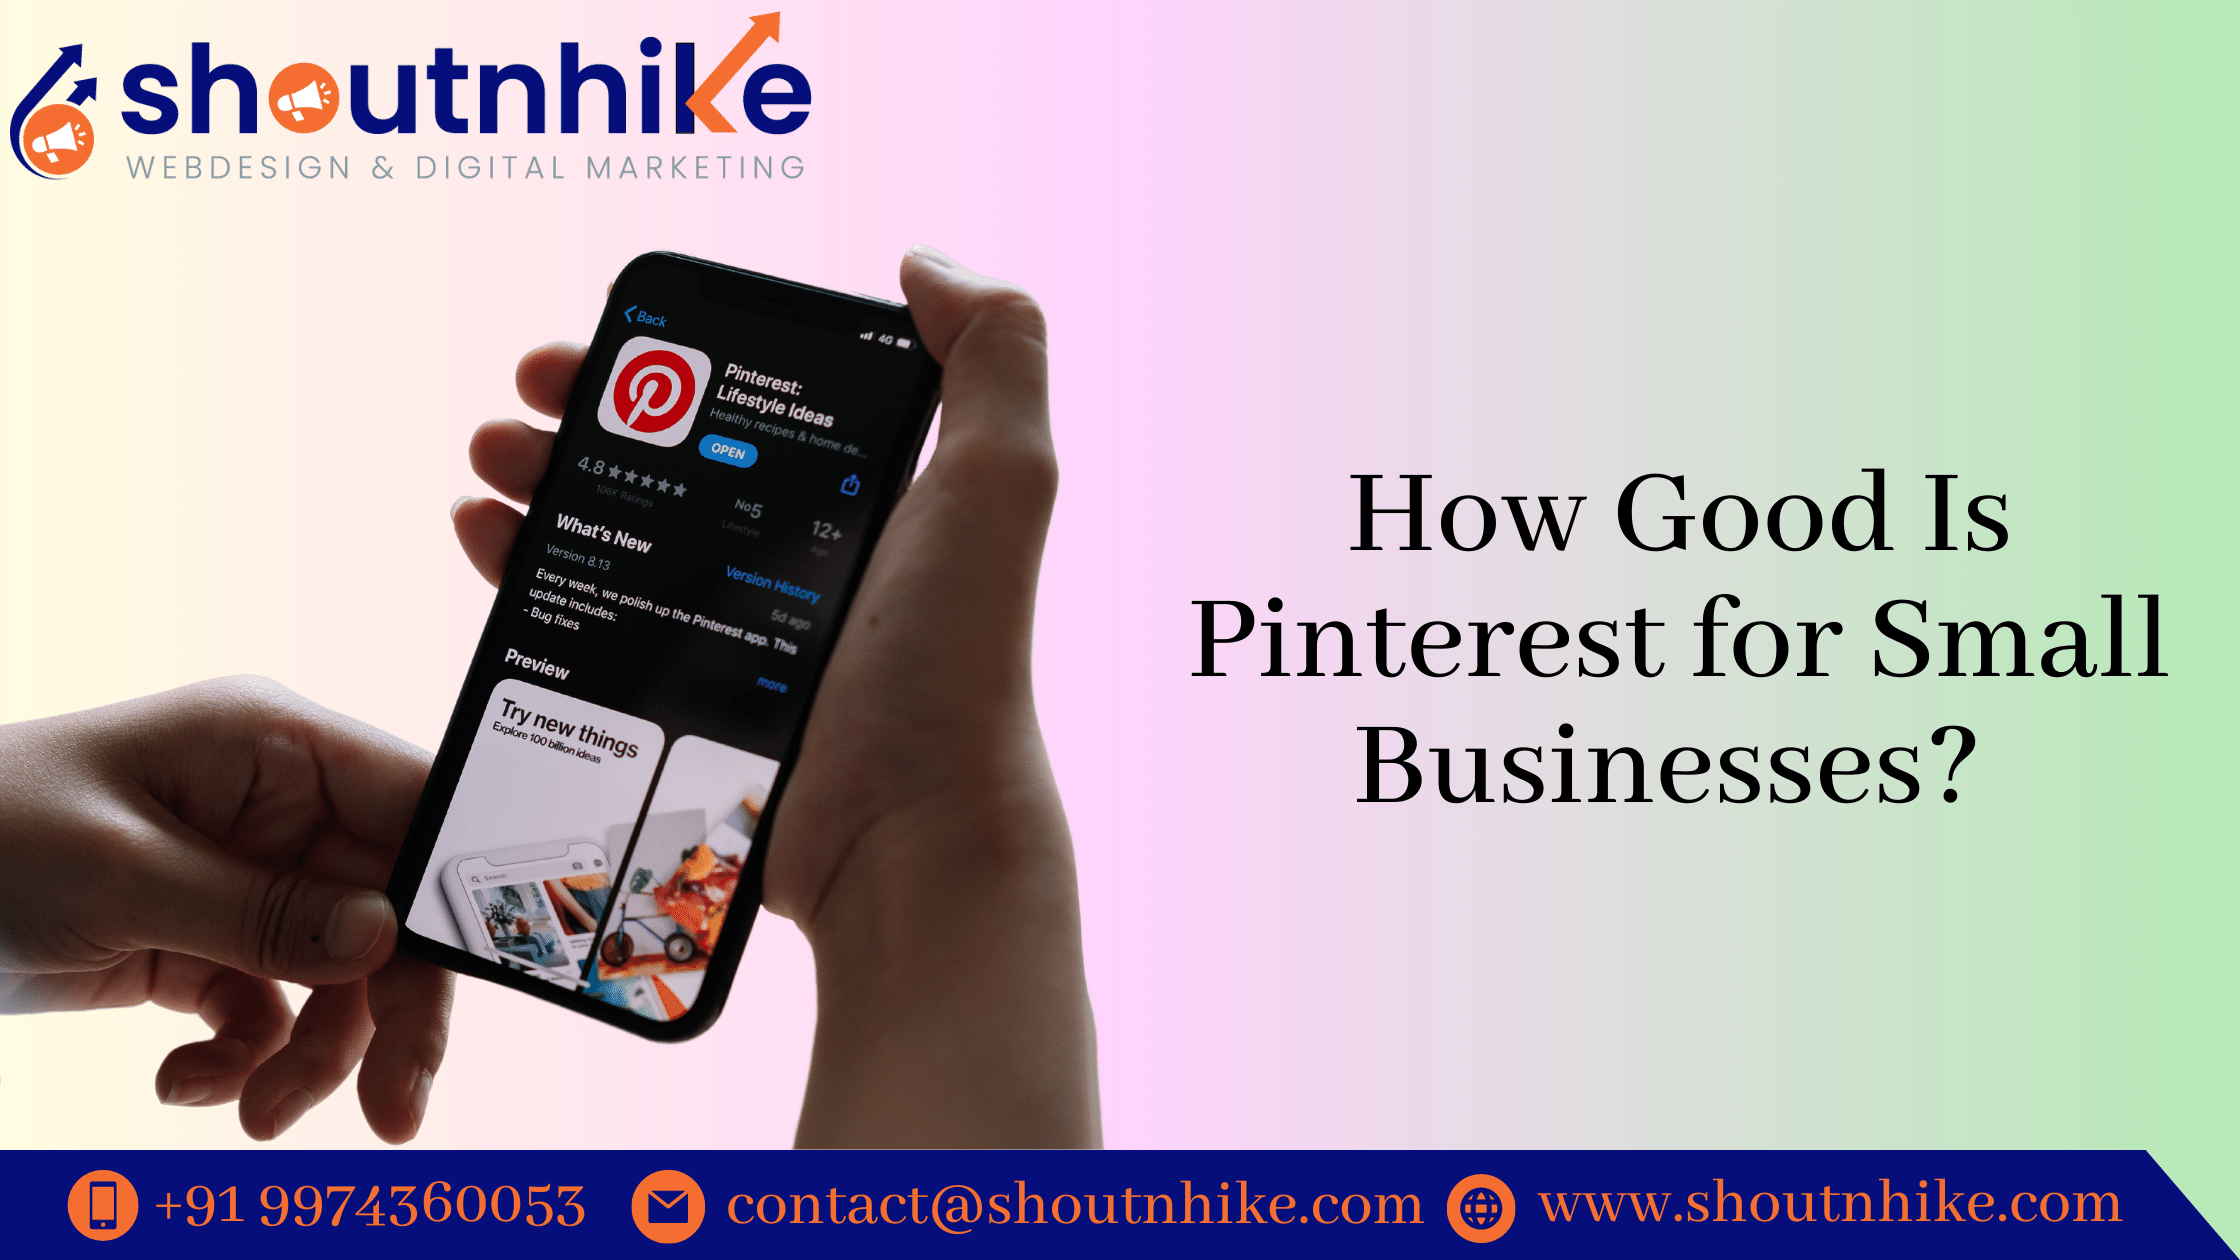 How good Is Pinterest for Small Businesses?